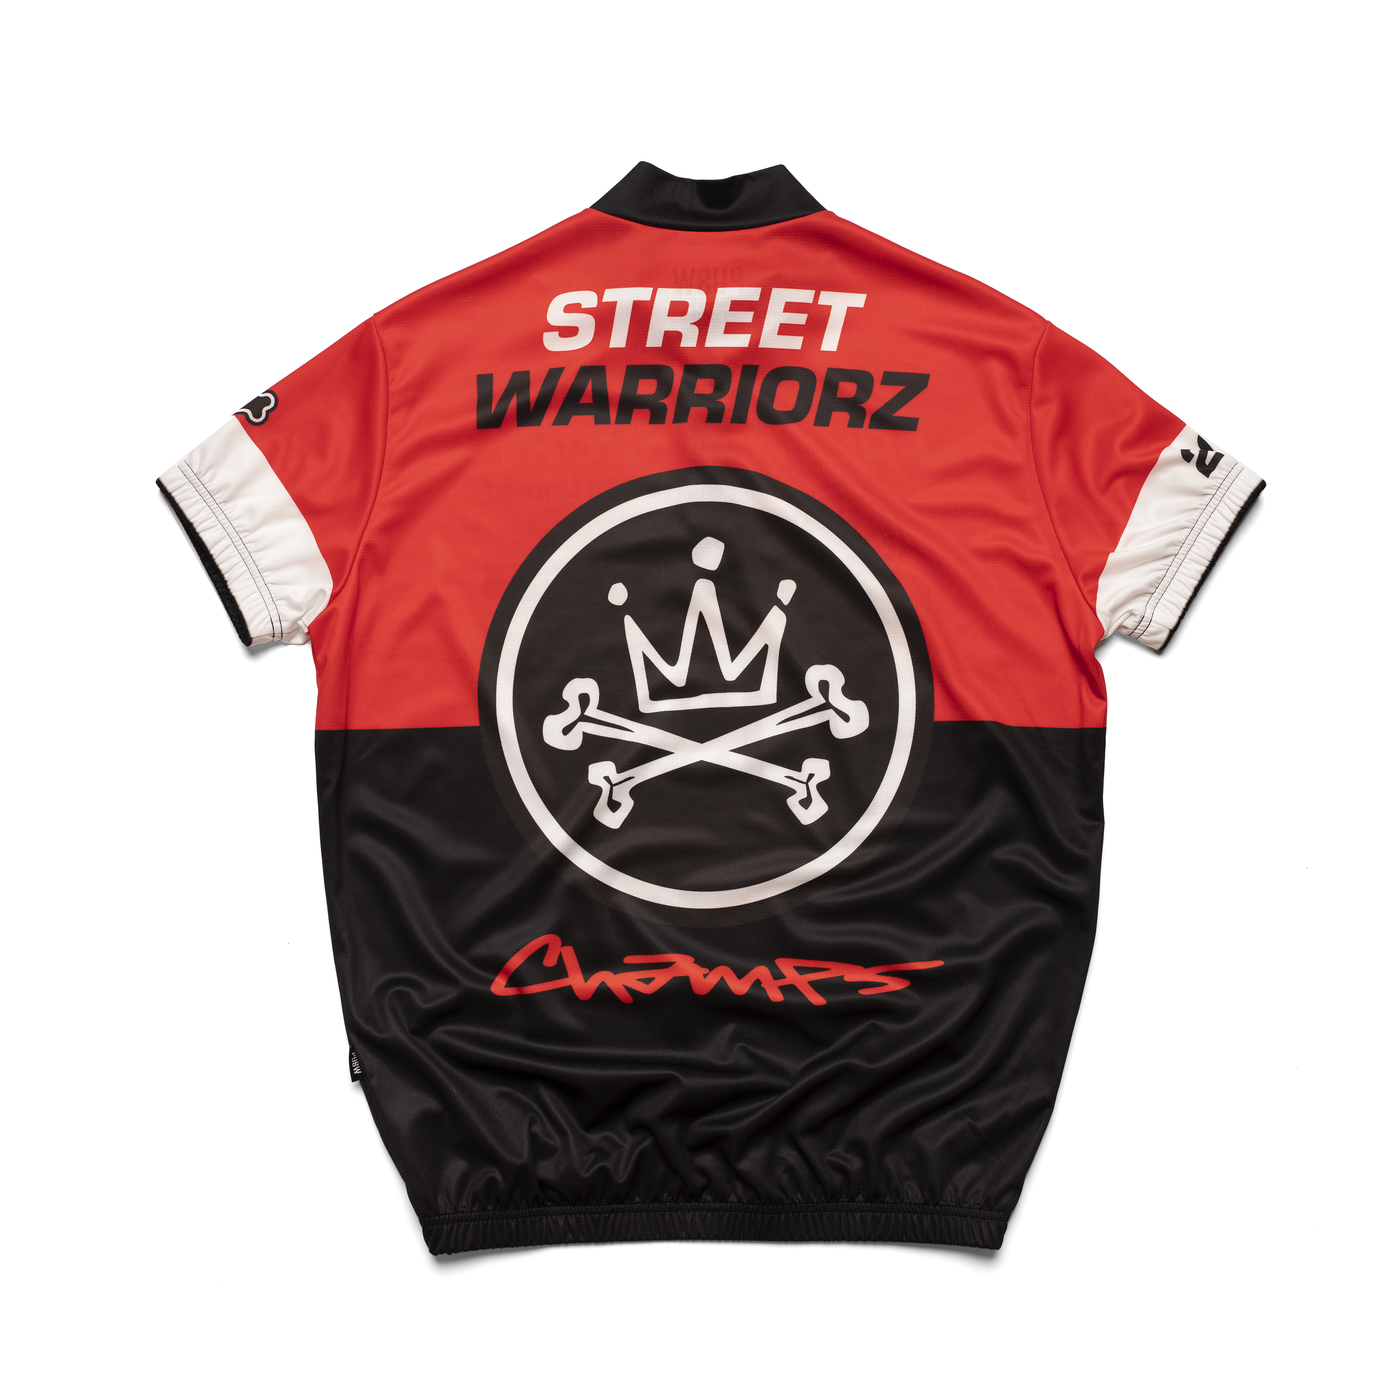 Riding Champs Jersey Tee